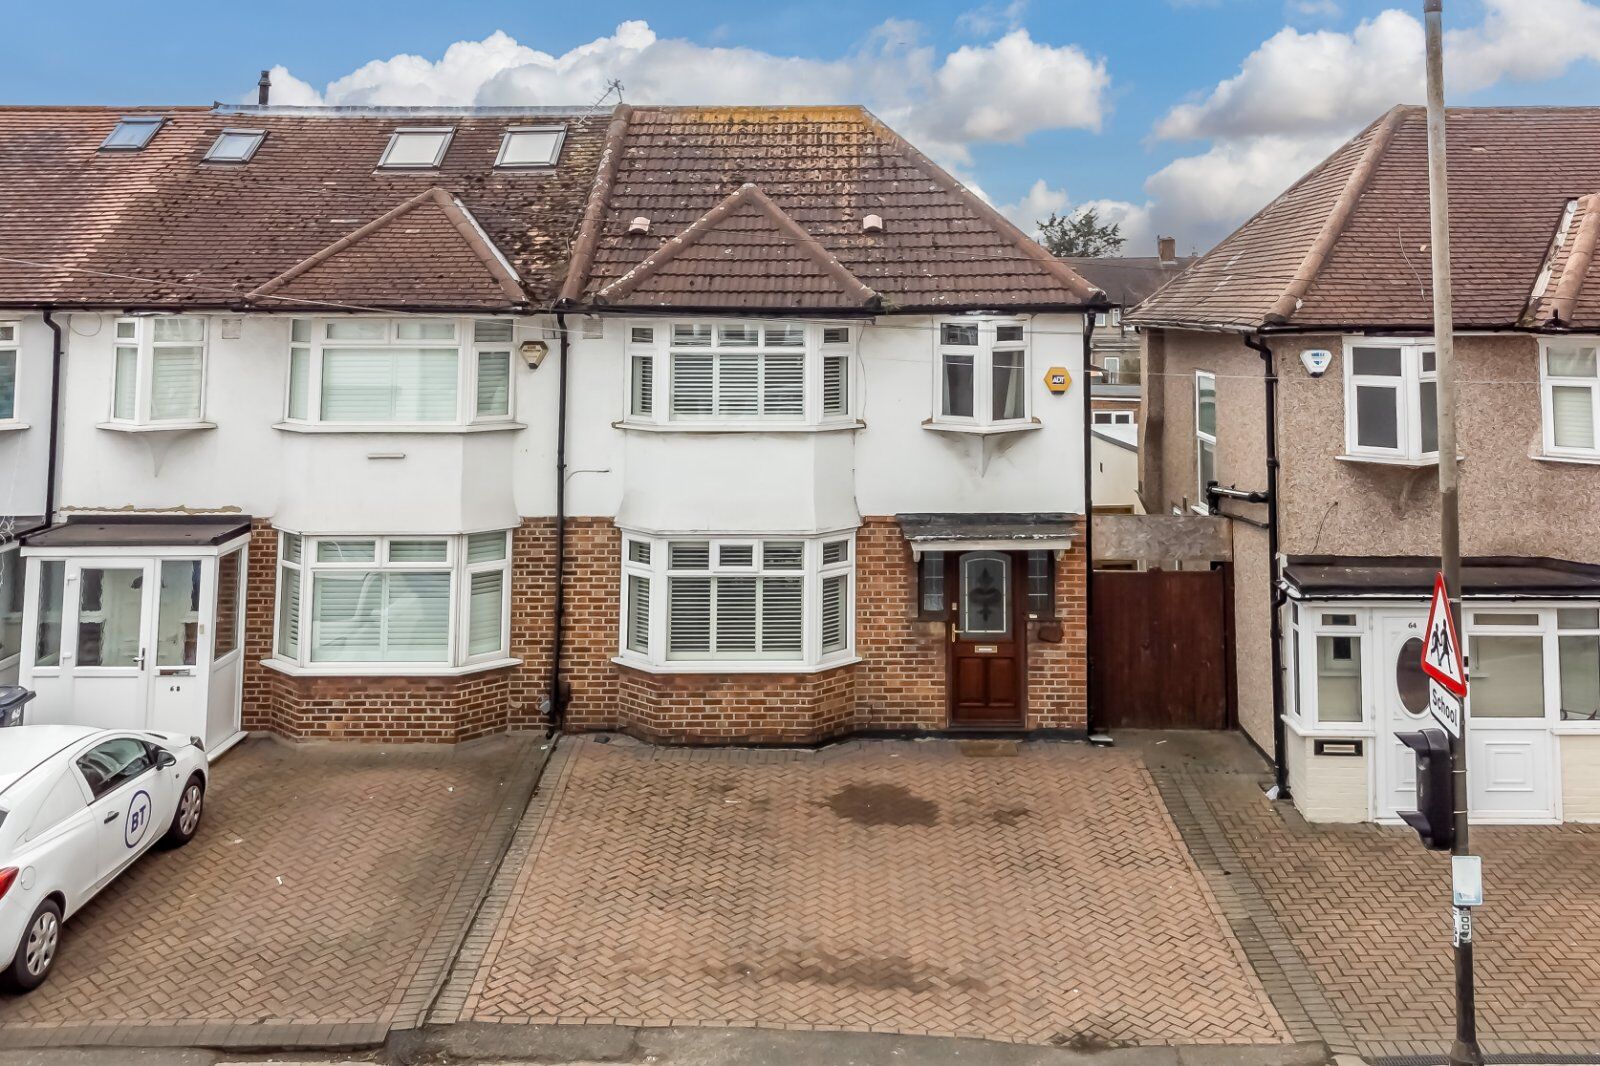 3 bedroom end terraced house for sale Tamworth Lane, Mitcham, CR4, main image